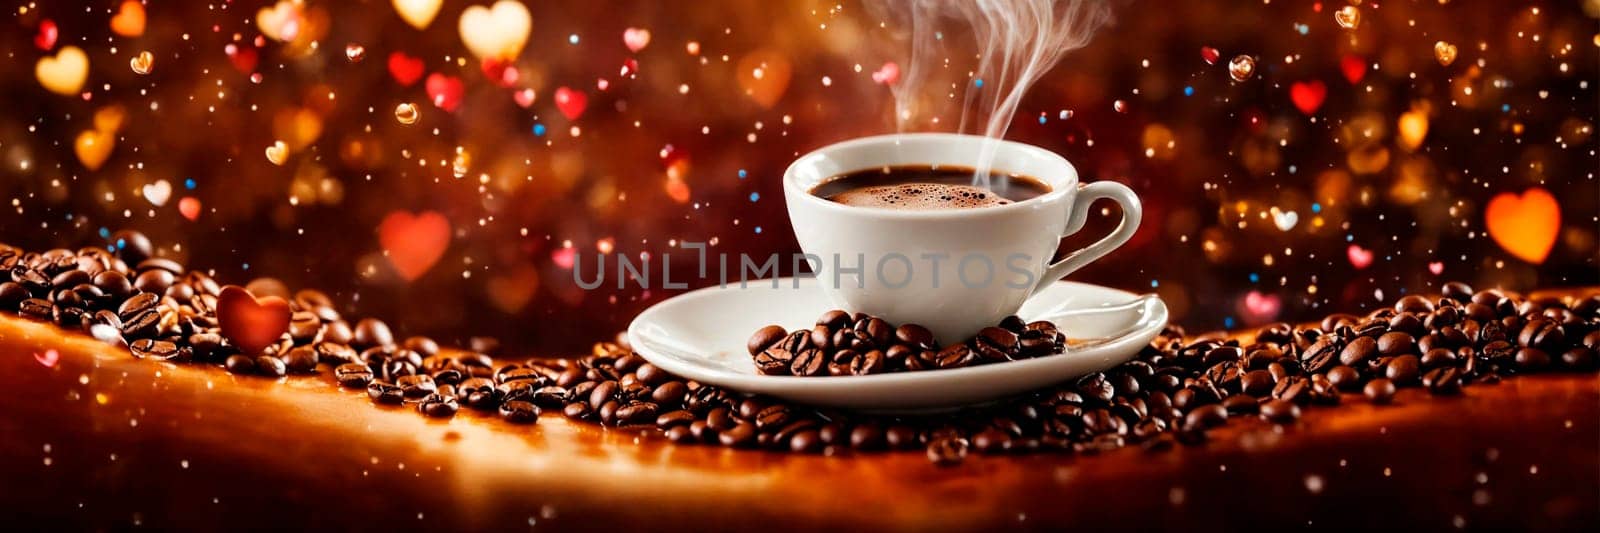 cup of coffee with a heart on the table. Selective focus. by yanadjana